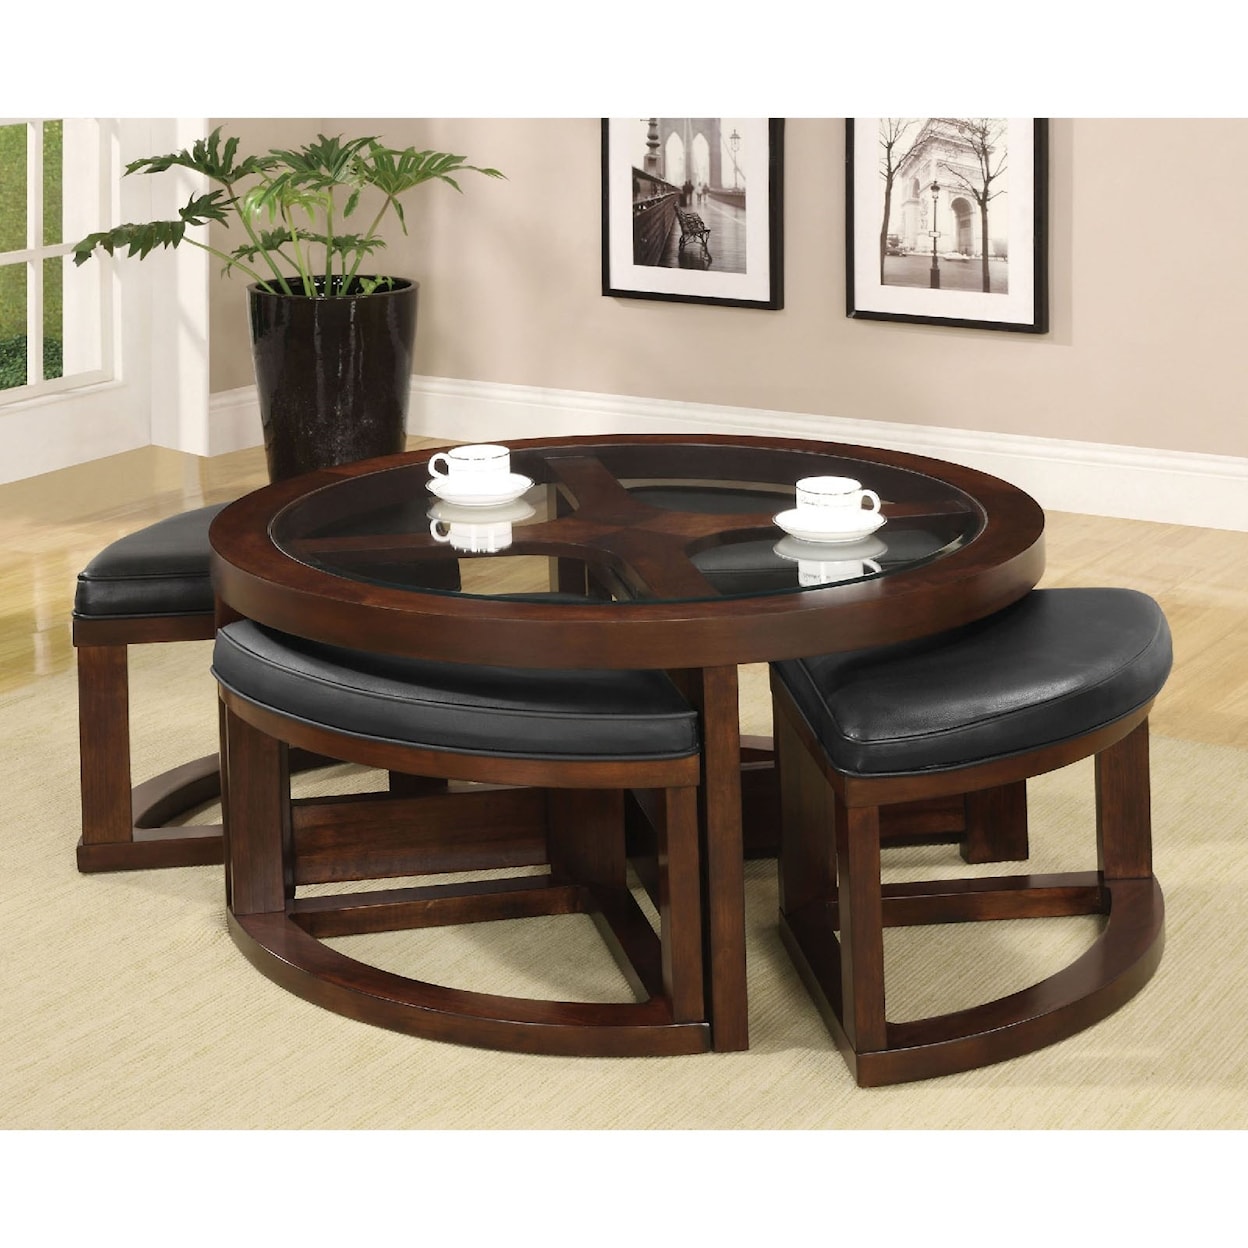 Furniture of America Crystal Cove II Cocktail Table with Ottomans